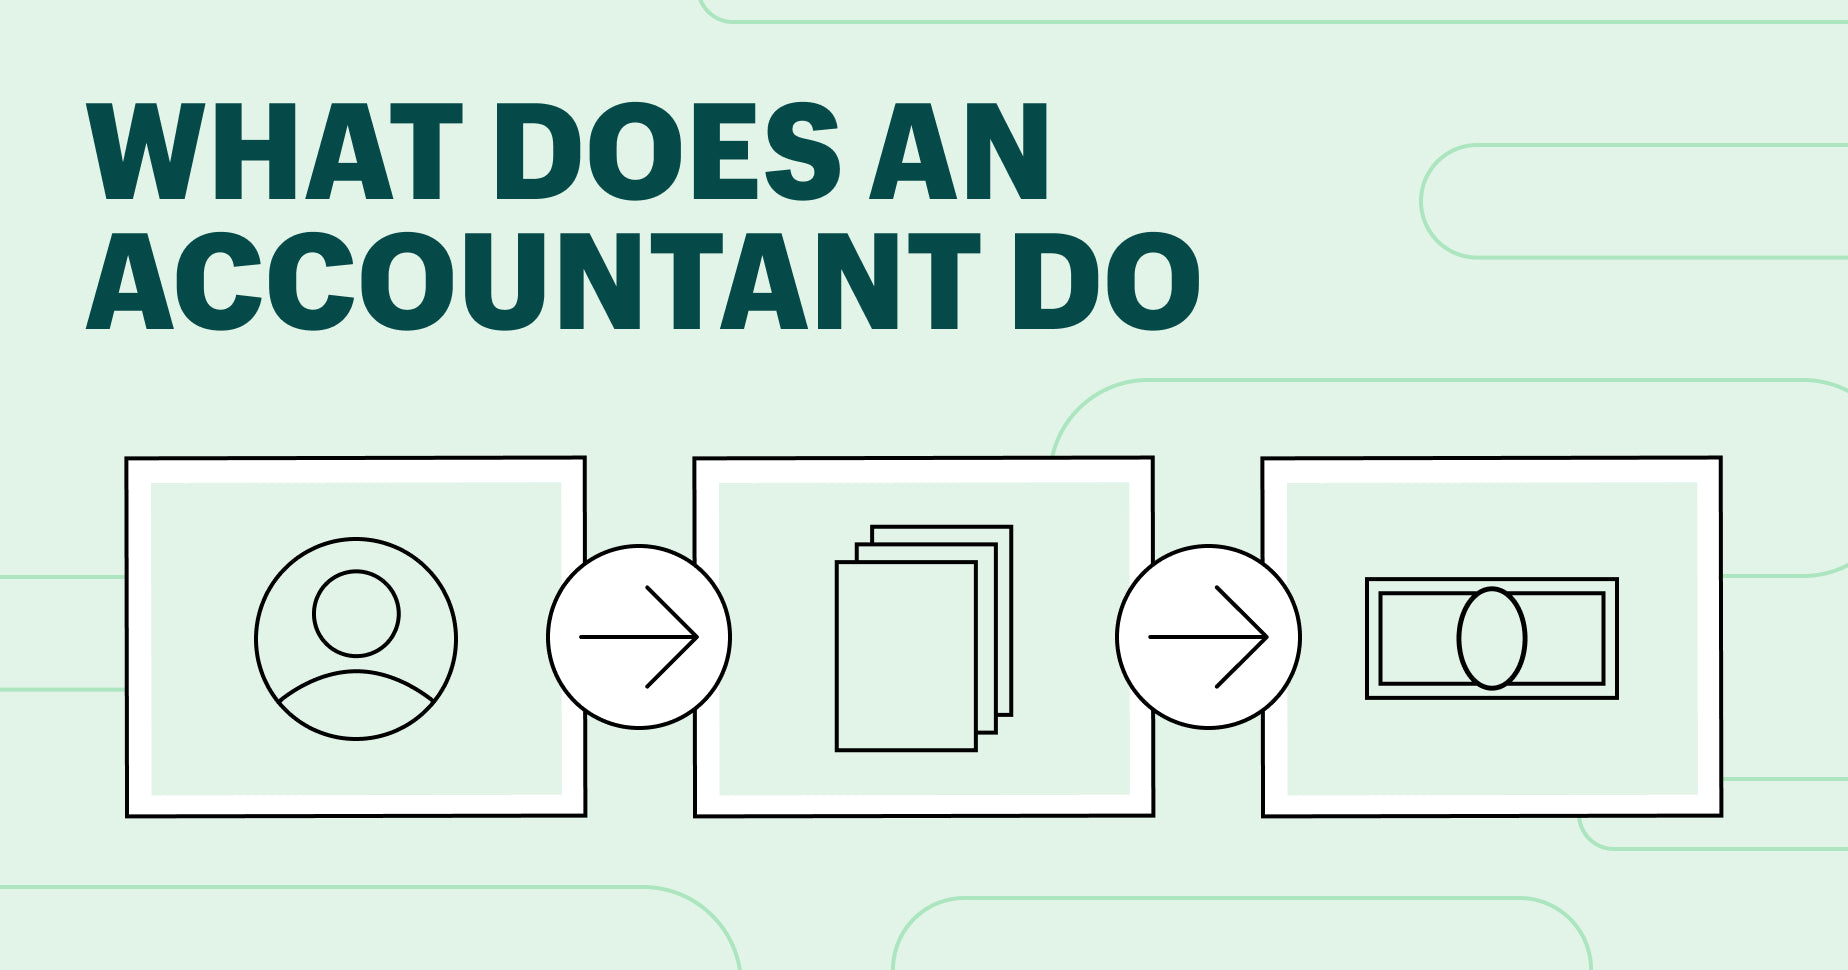 Image for a blog post about what an accountant does